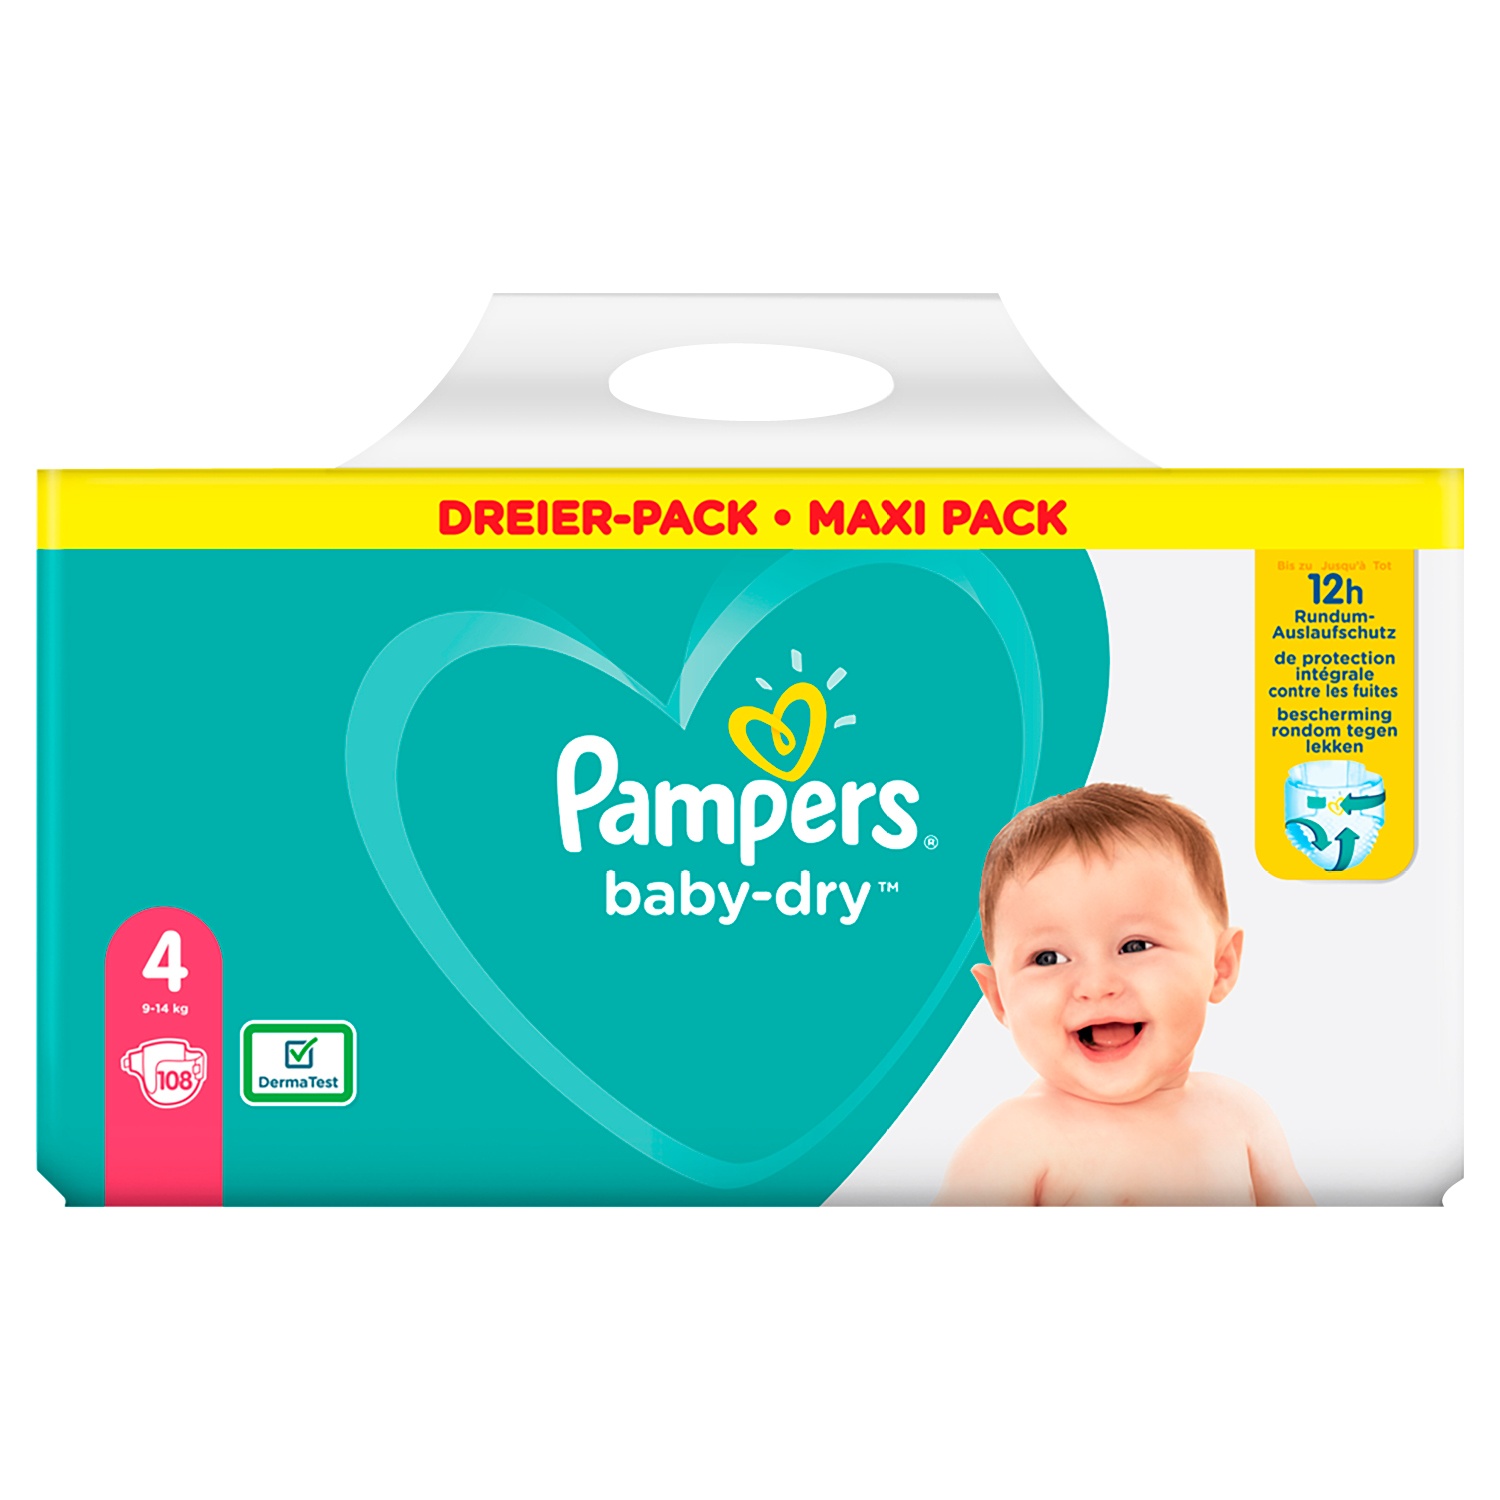 Pampers® baby-dry™